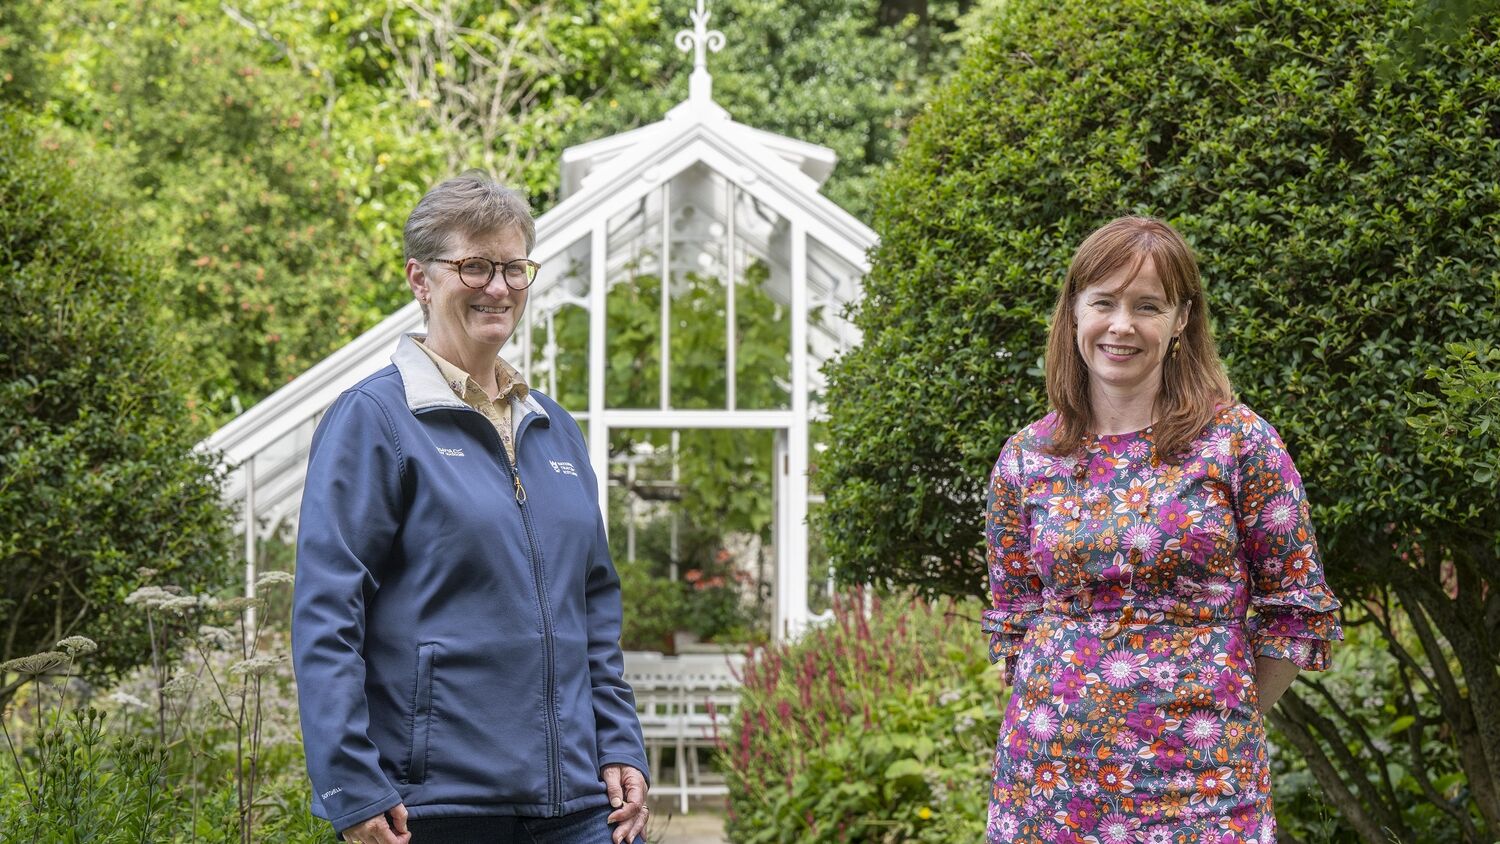 Two women stand in a garden, with an Edwardian glasshouse behind them. The lady on the left wears a navy National Trust for Scotland jacket. The lady on the right wears a floral dress.